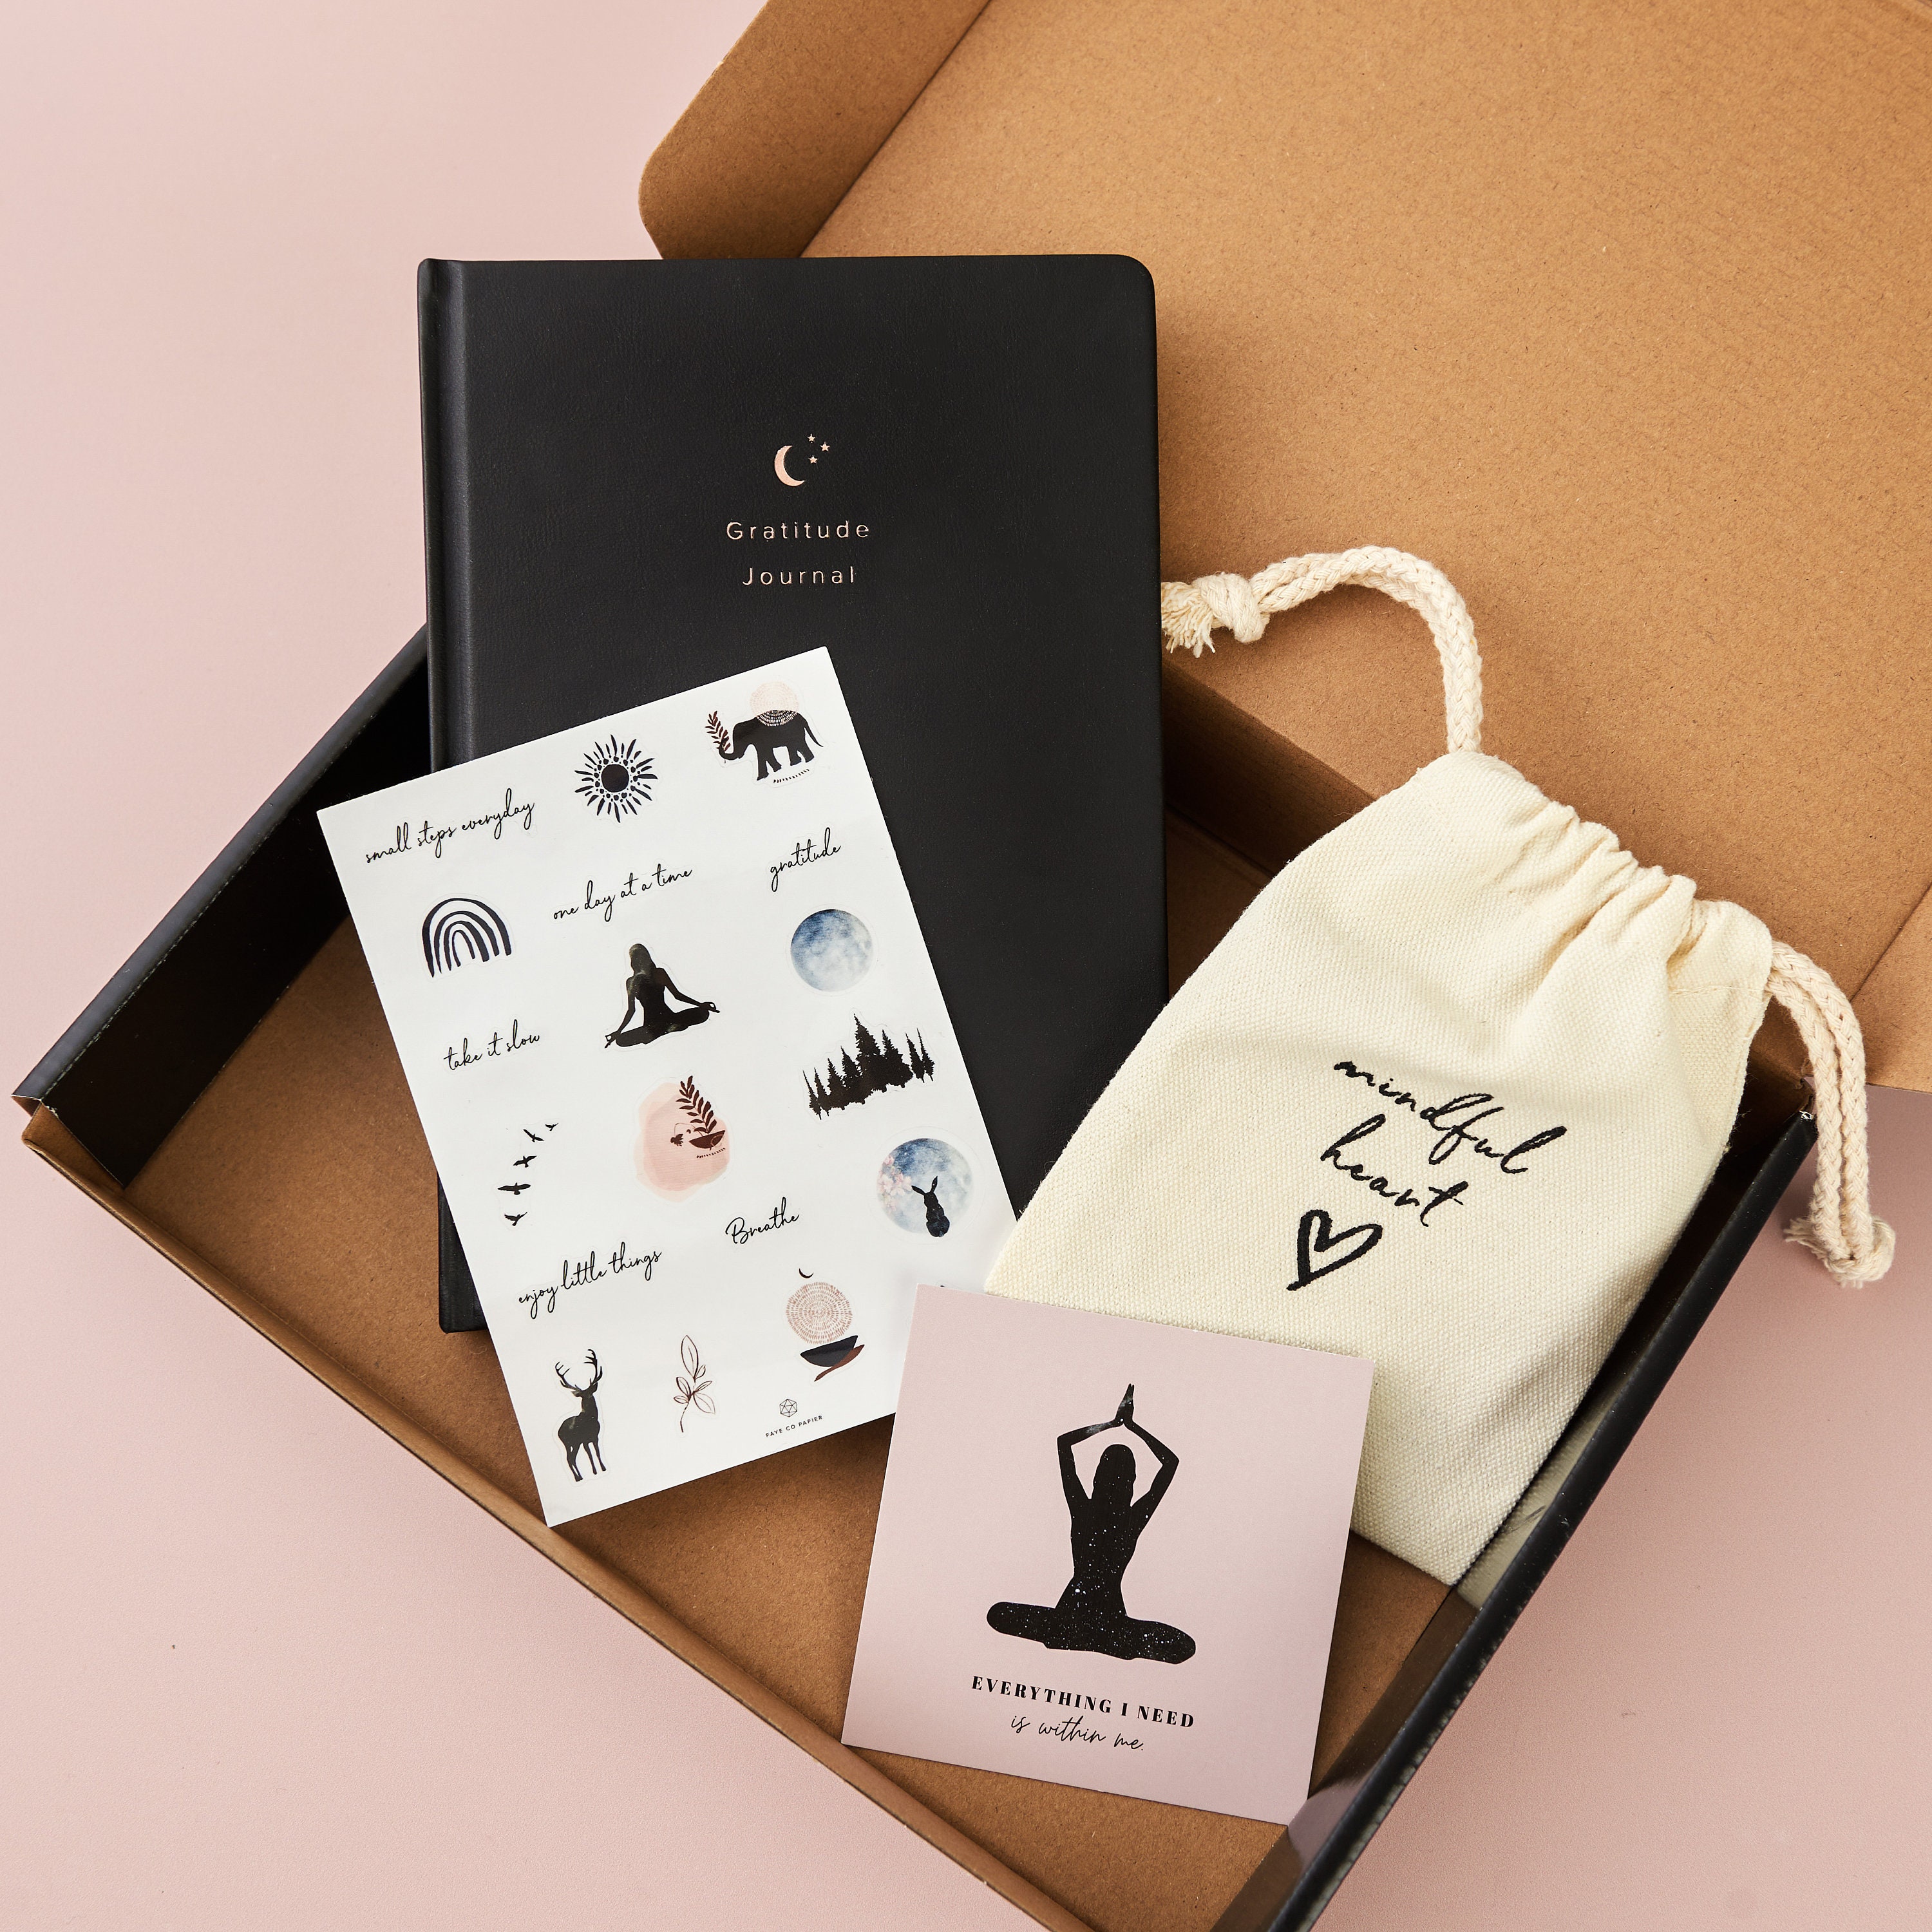 The Mindful Moment' Curated Gift Box – Gifts for Good